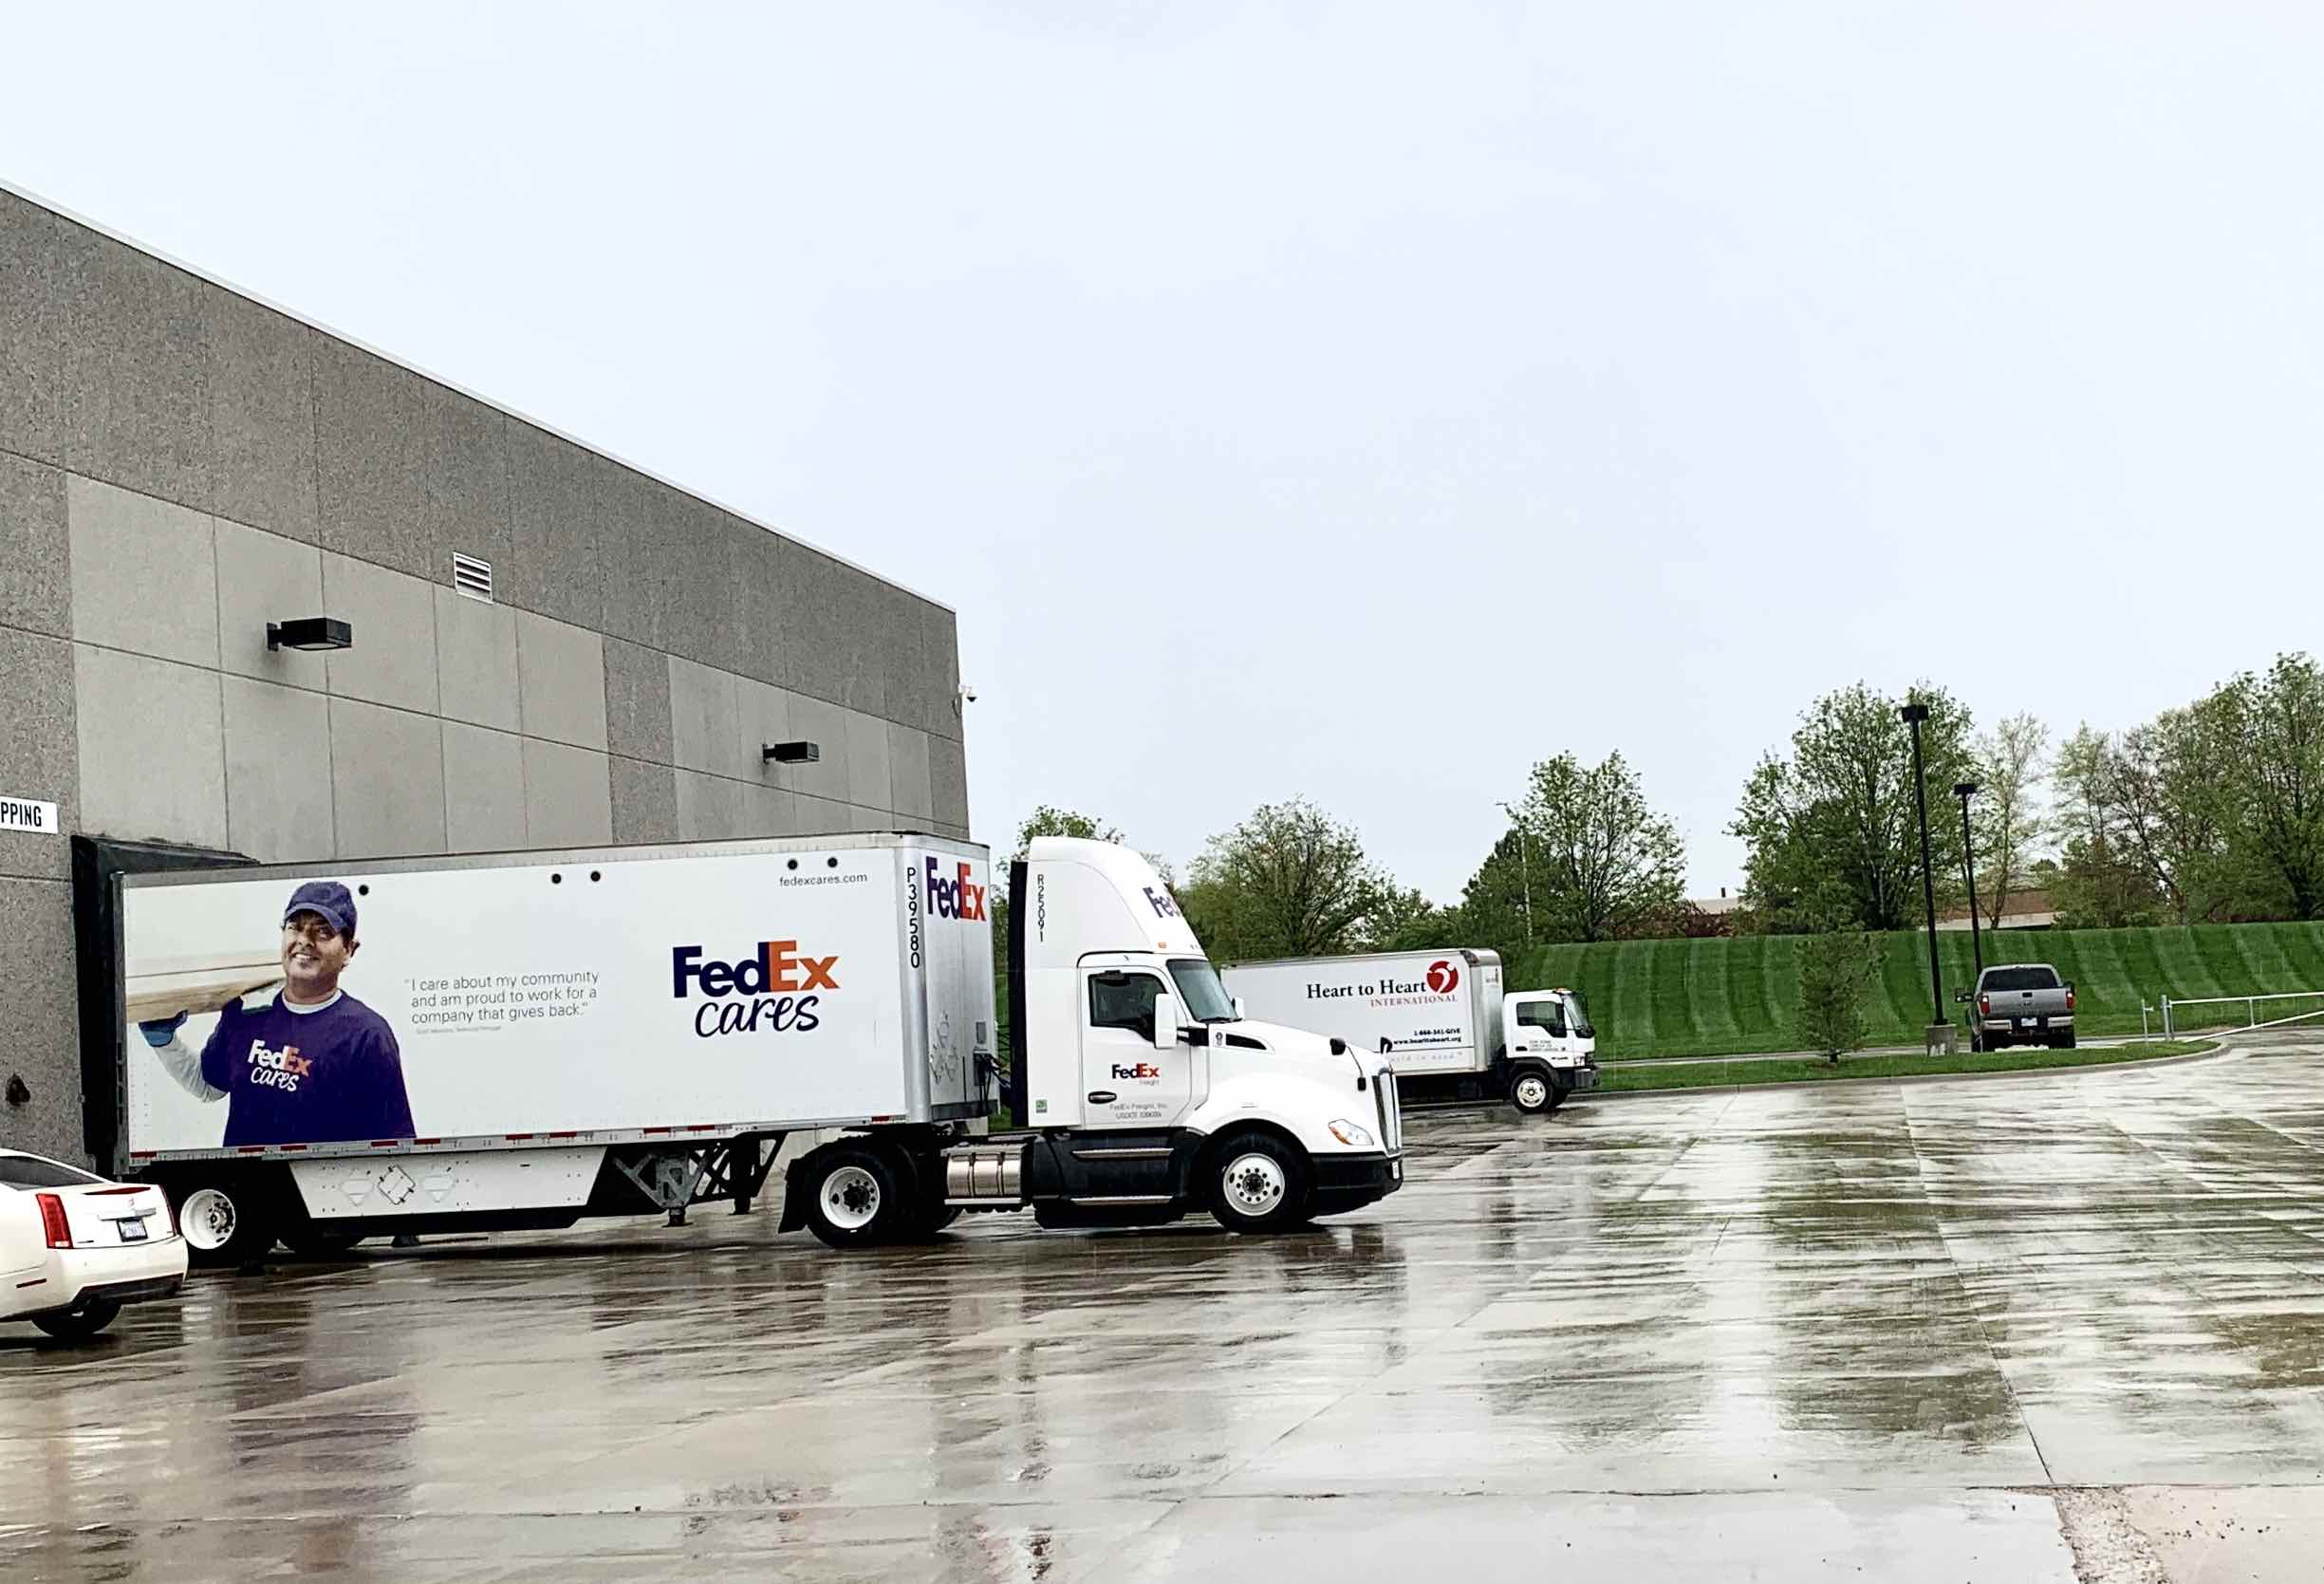 FedEx donates services to help fight Covid-19